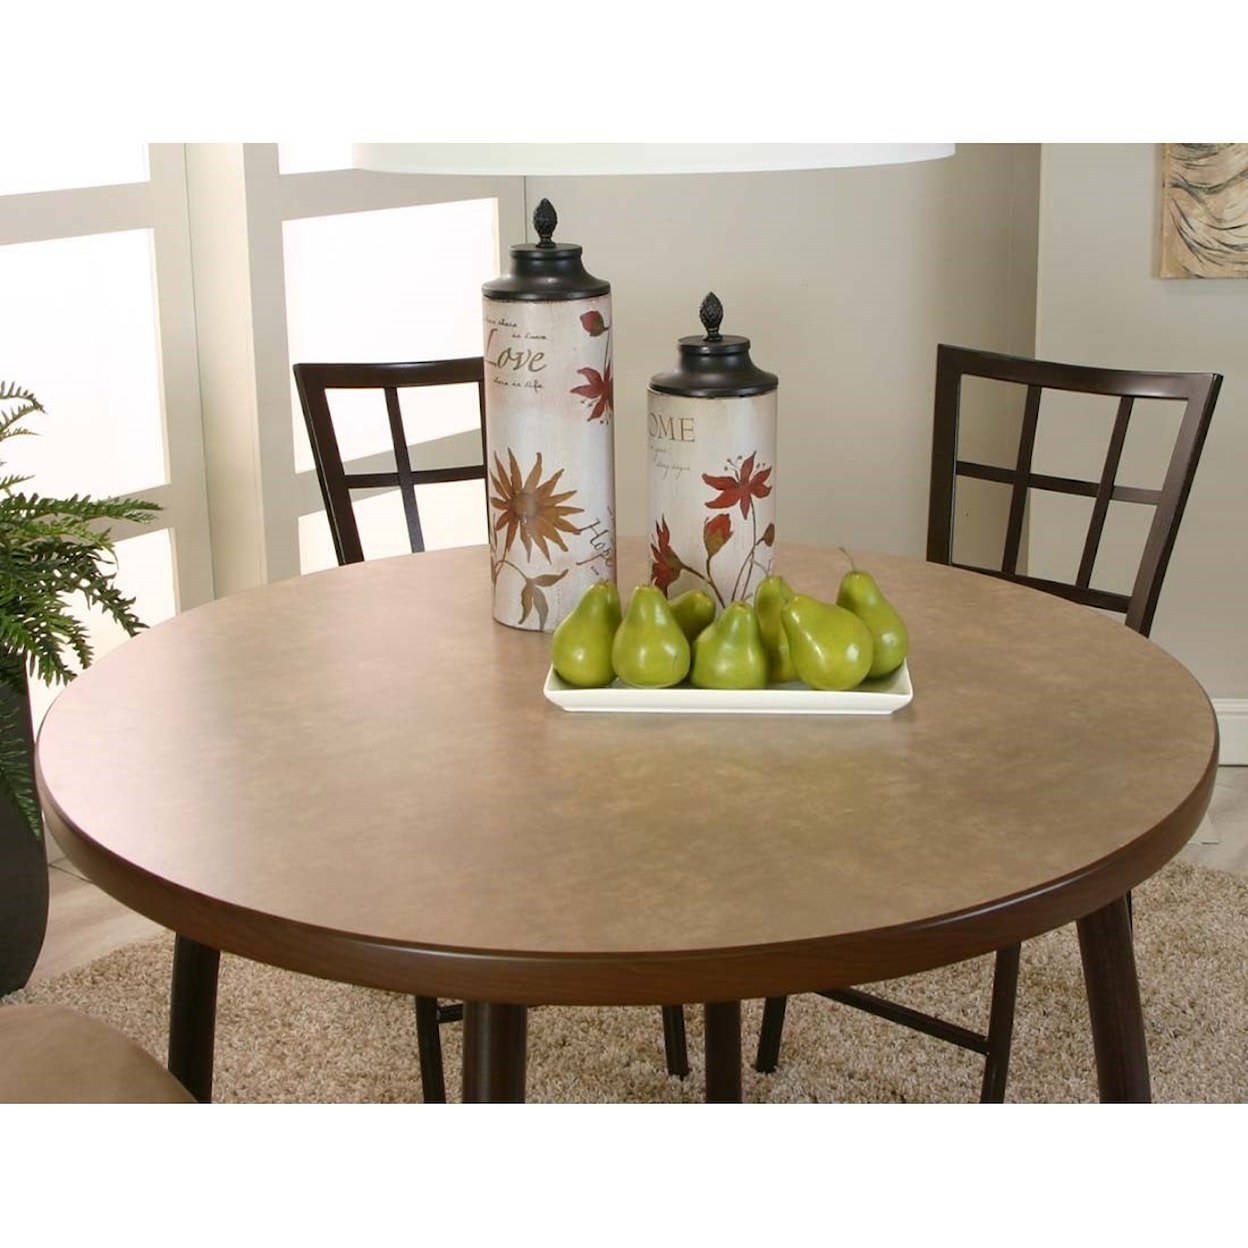 Cramco, Inc Cramco Dinettes - Vision 5pc Dining Room Group